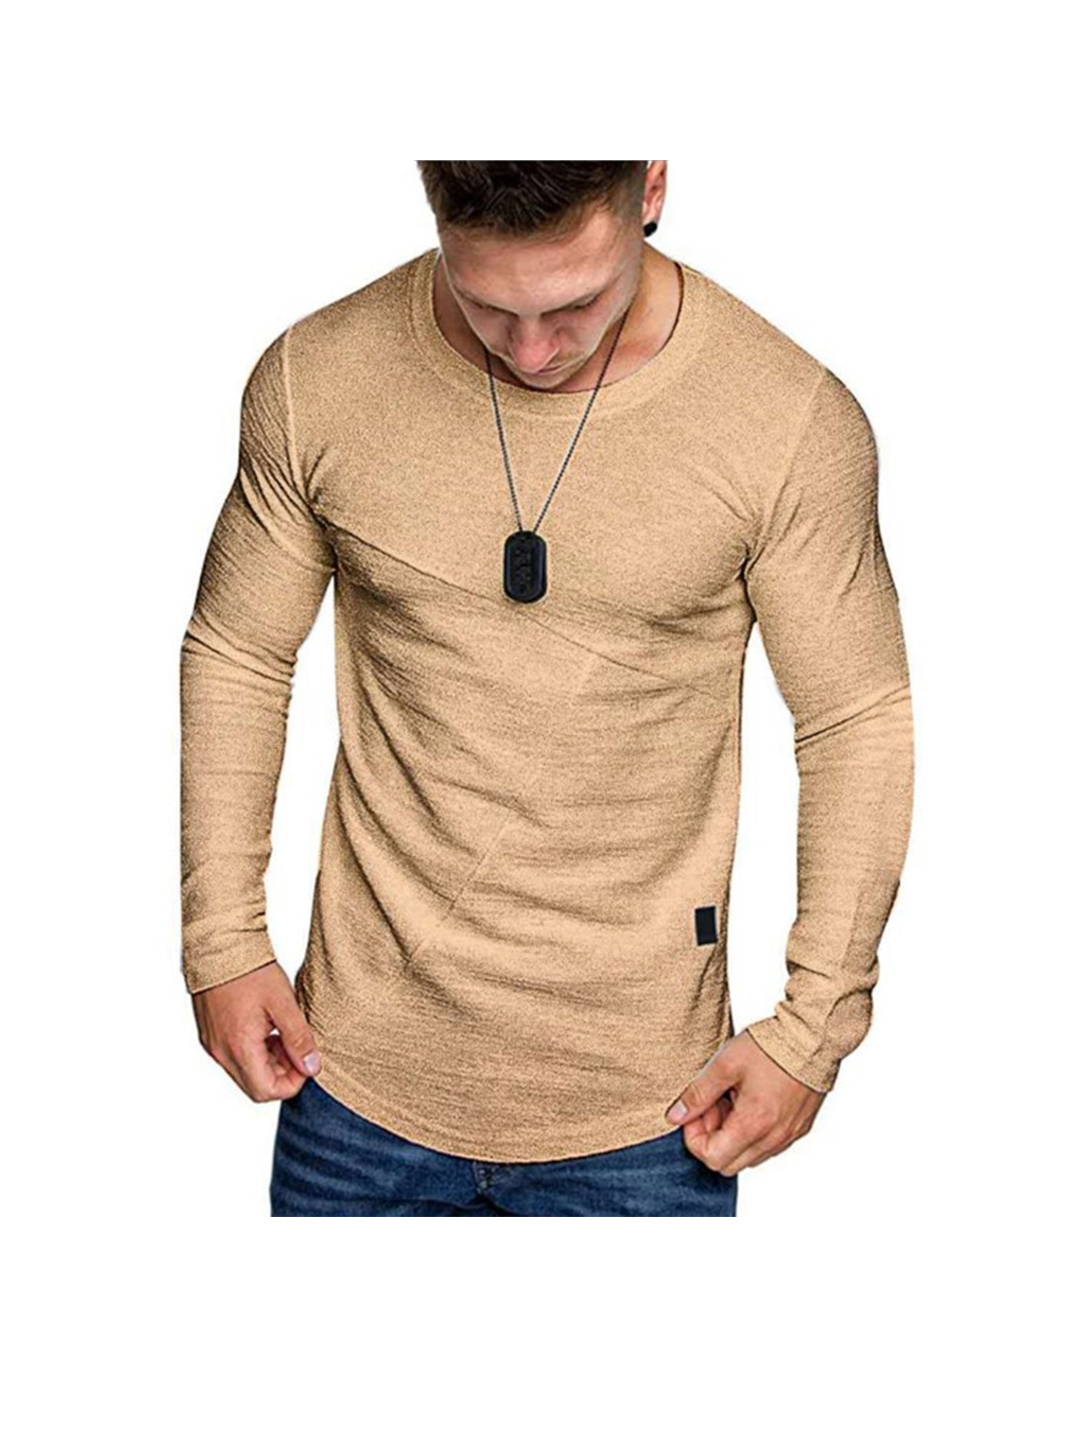 Jeffrey Solid Color Long-sleeved T-Shirt